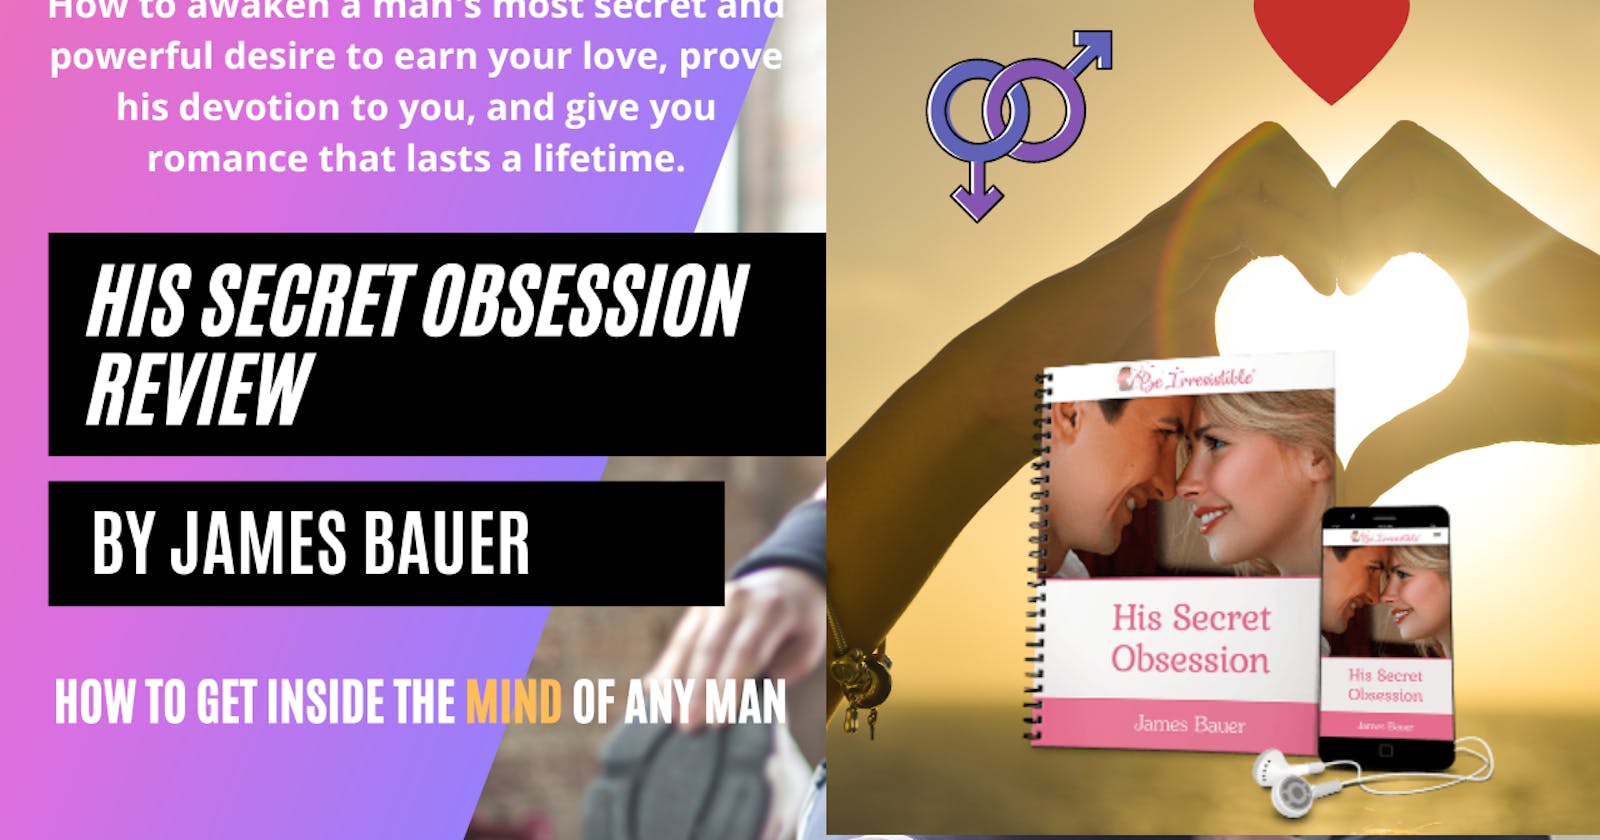 His Secret Obsession Review - PDF Ebook Download by James Bauer